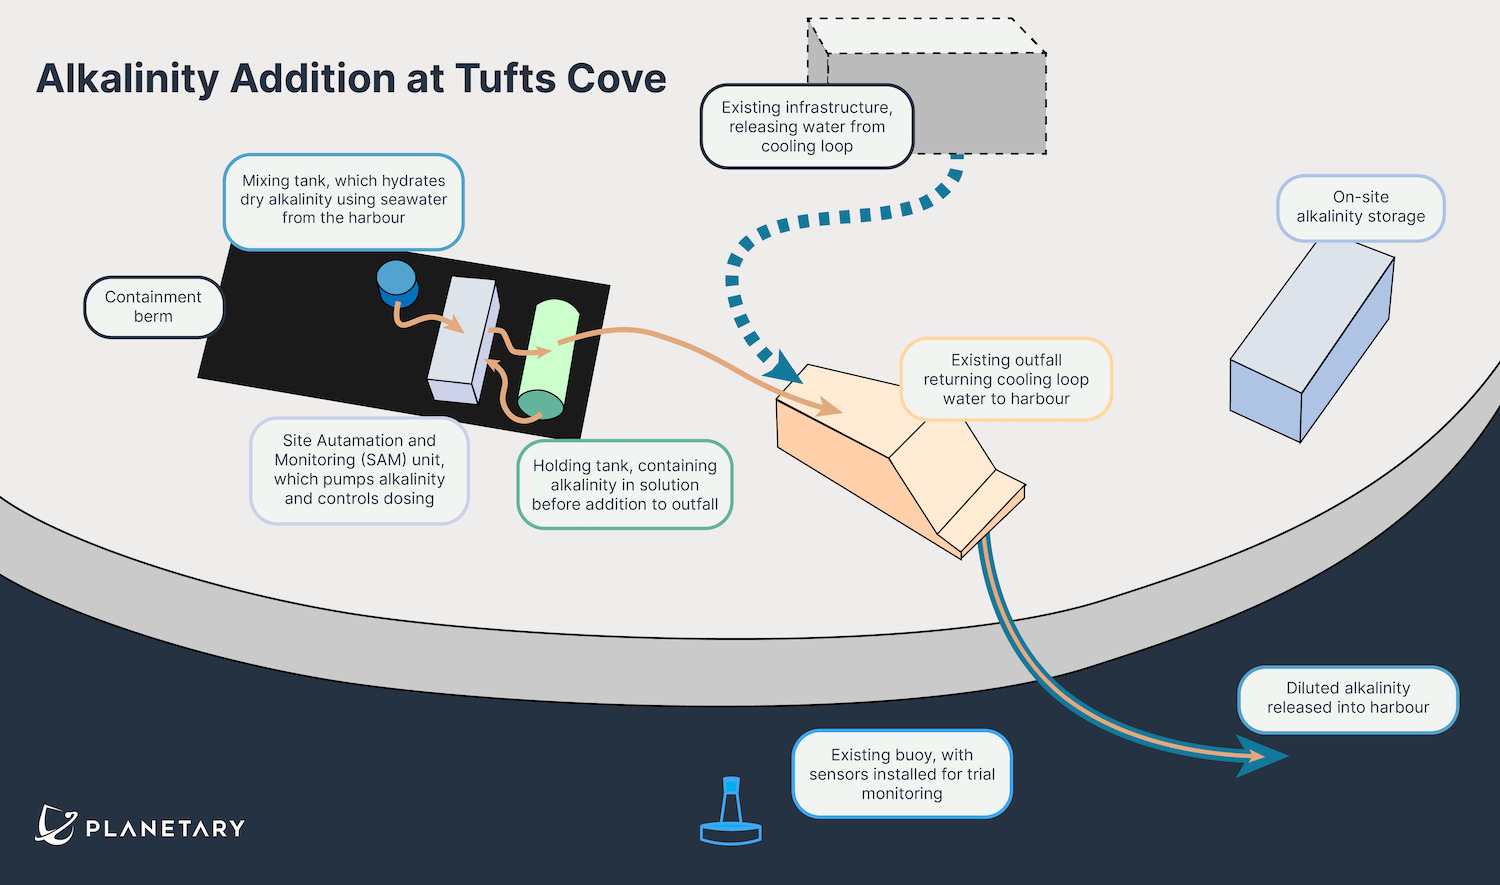 Infographic showing on-site presence at Tufts Cove, demonstrating the steps of an alkalinity addition.